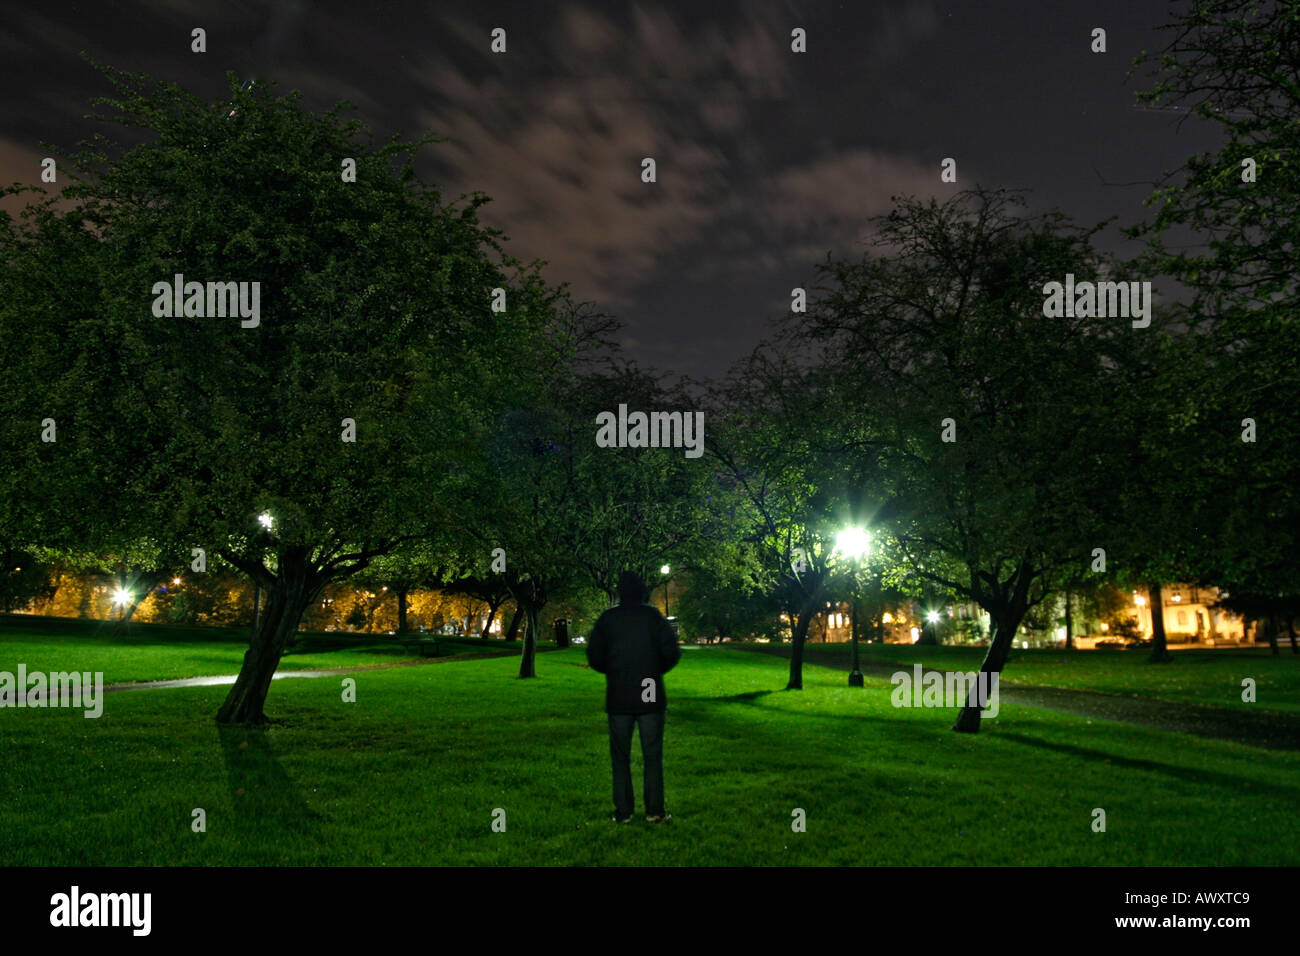 man stood under a tree in a park at night looking out towards a path and street lamps Stock Photo